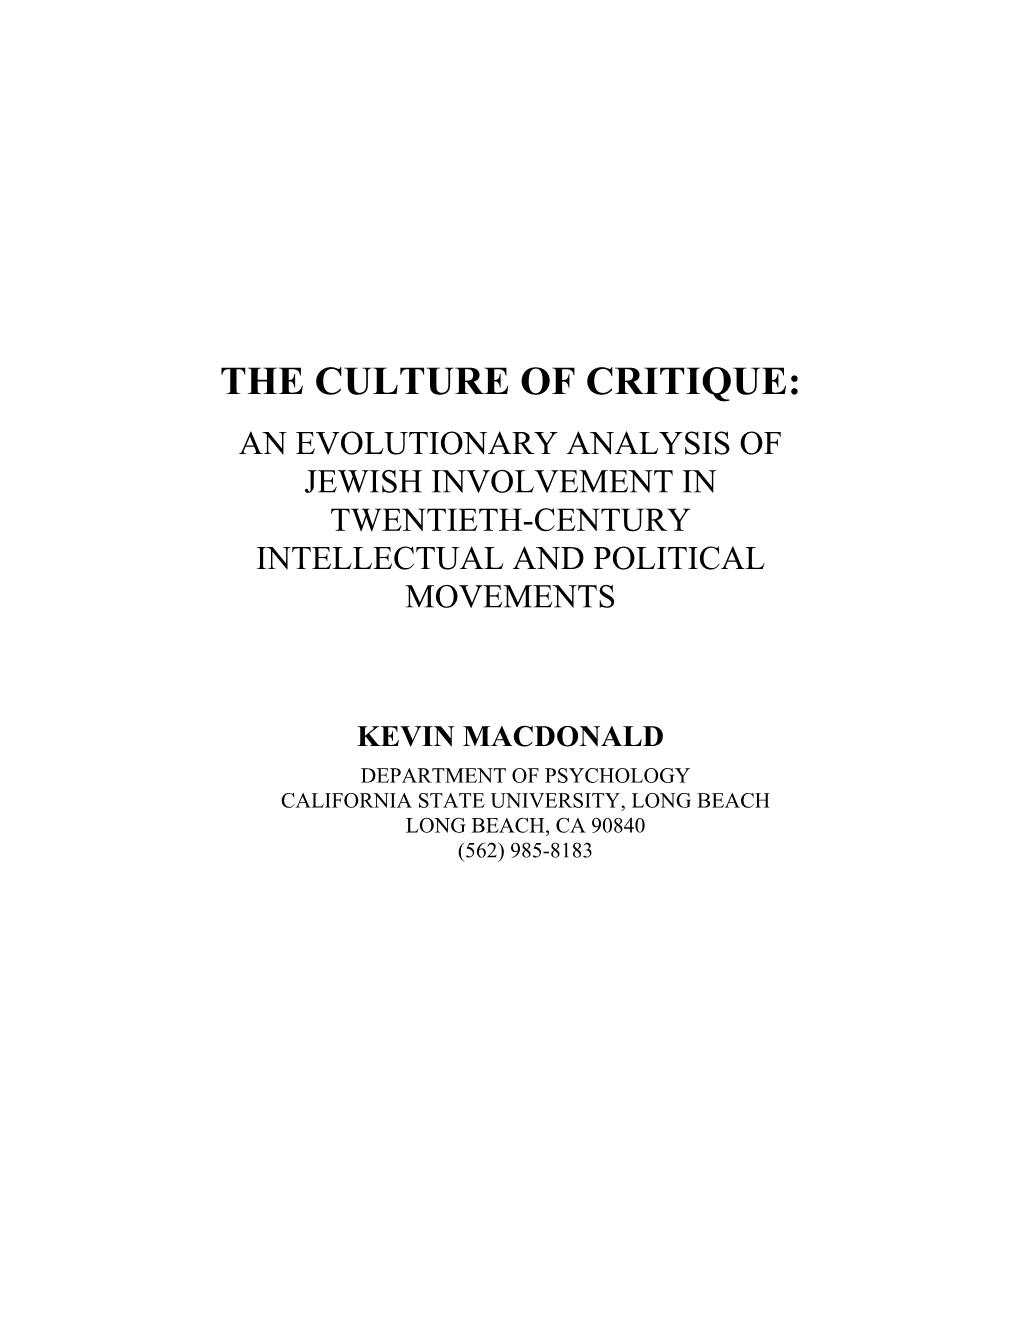 The Culture of Critique: an Evolutionary Analysis of Jewish Involvement in Twentieth-Century Intellectual and Political Movements